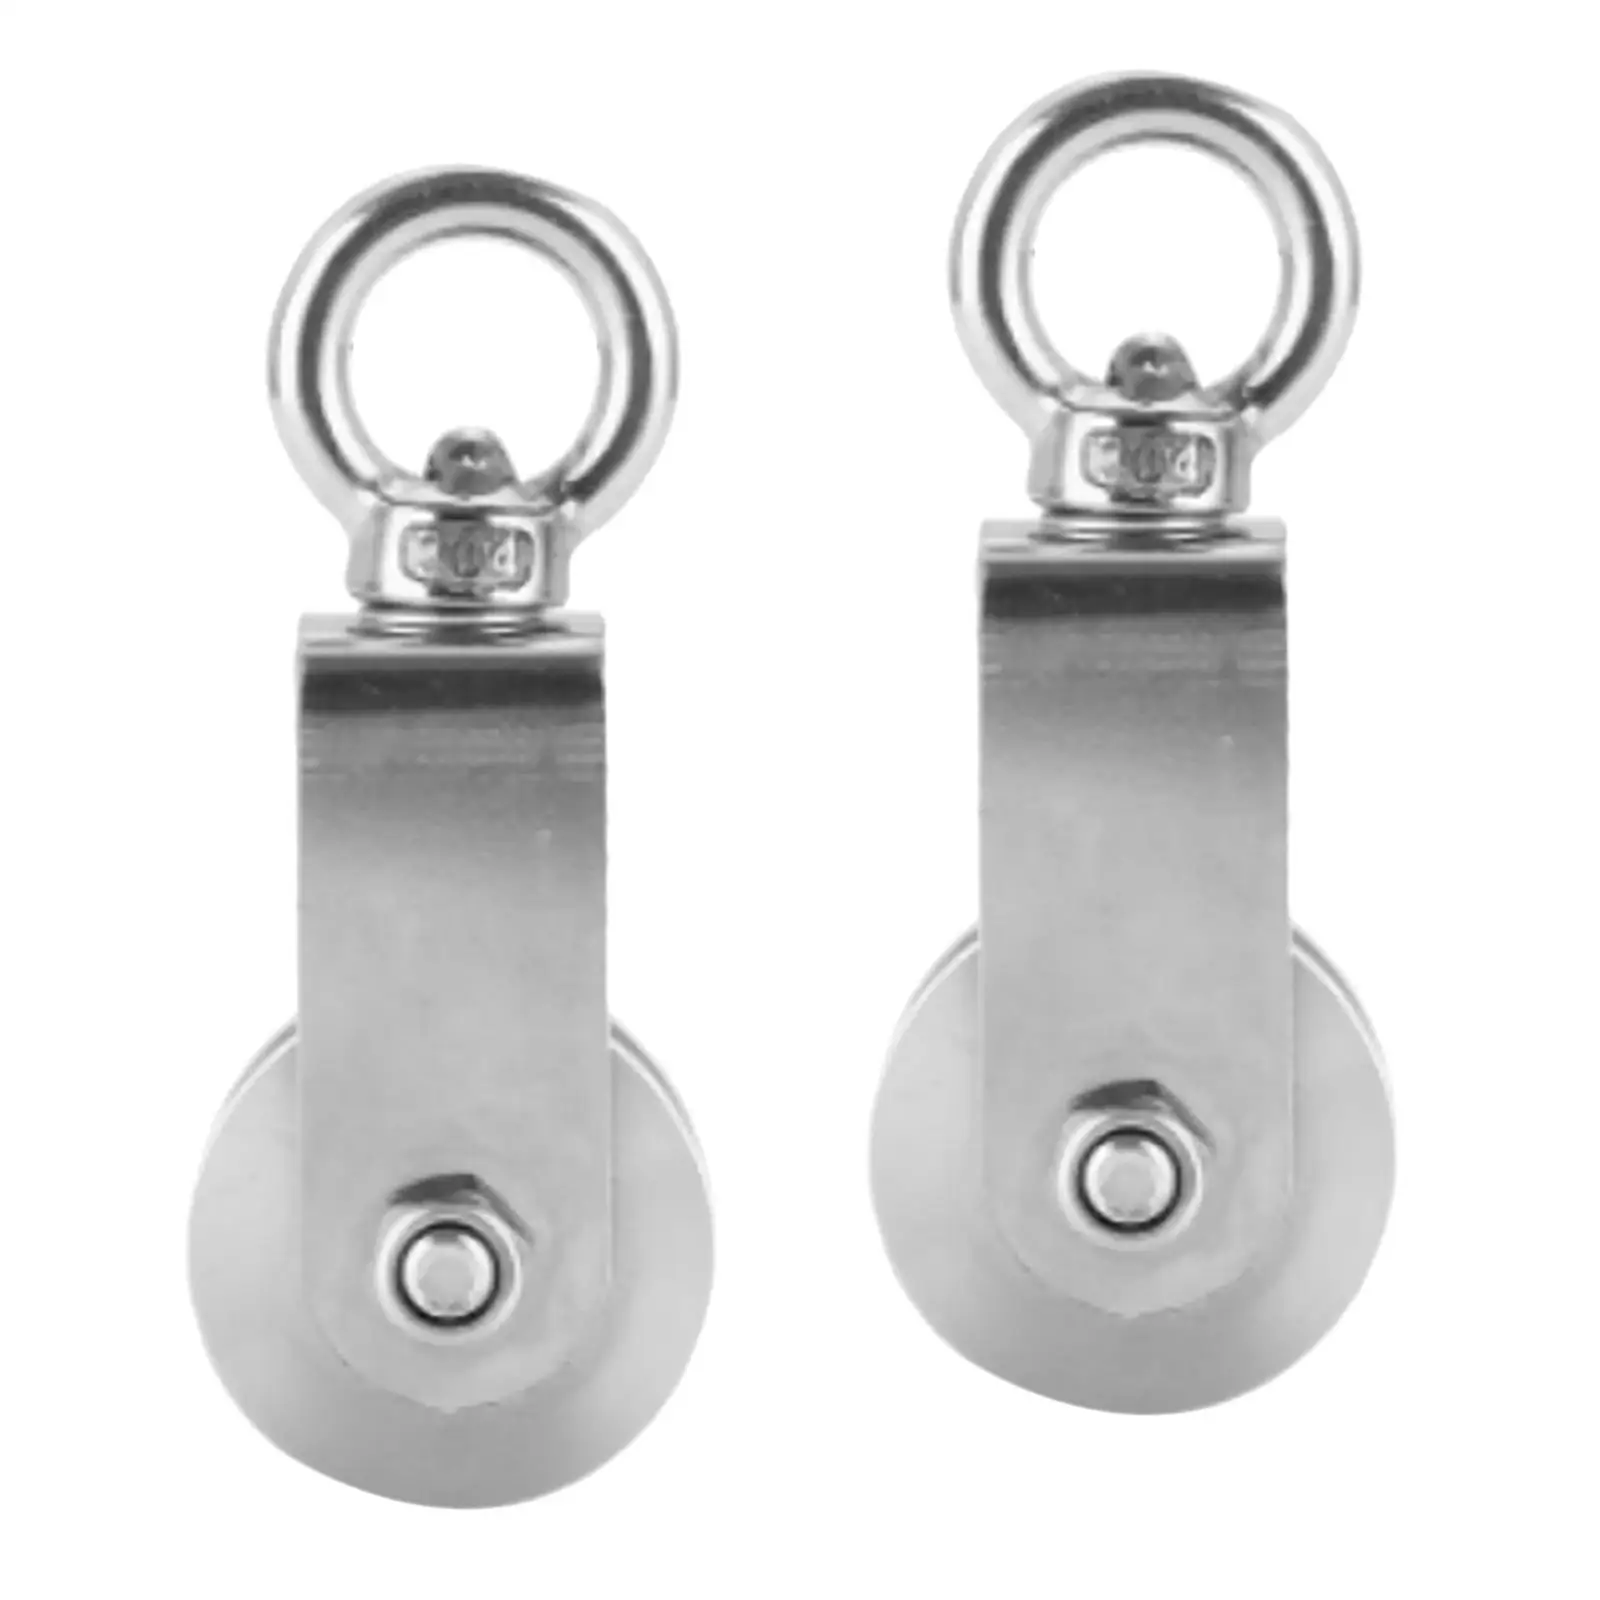 2x Stainless Steel Pulley Block Smooth Gym Equipment Lifting Wheel for DIY Attachment DIY Home Projects Gym Wire Maintenance